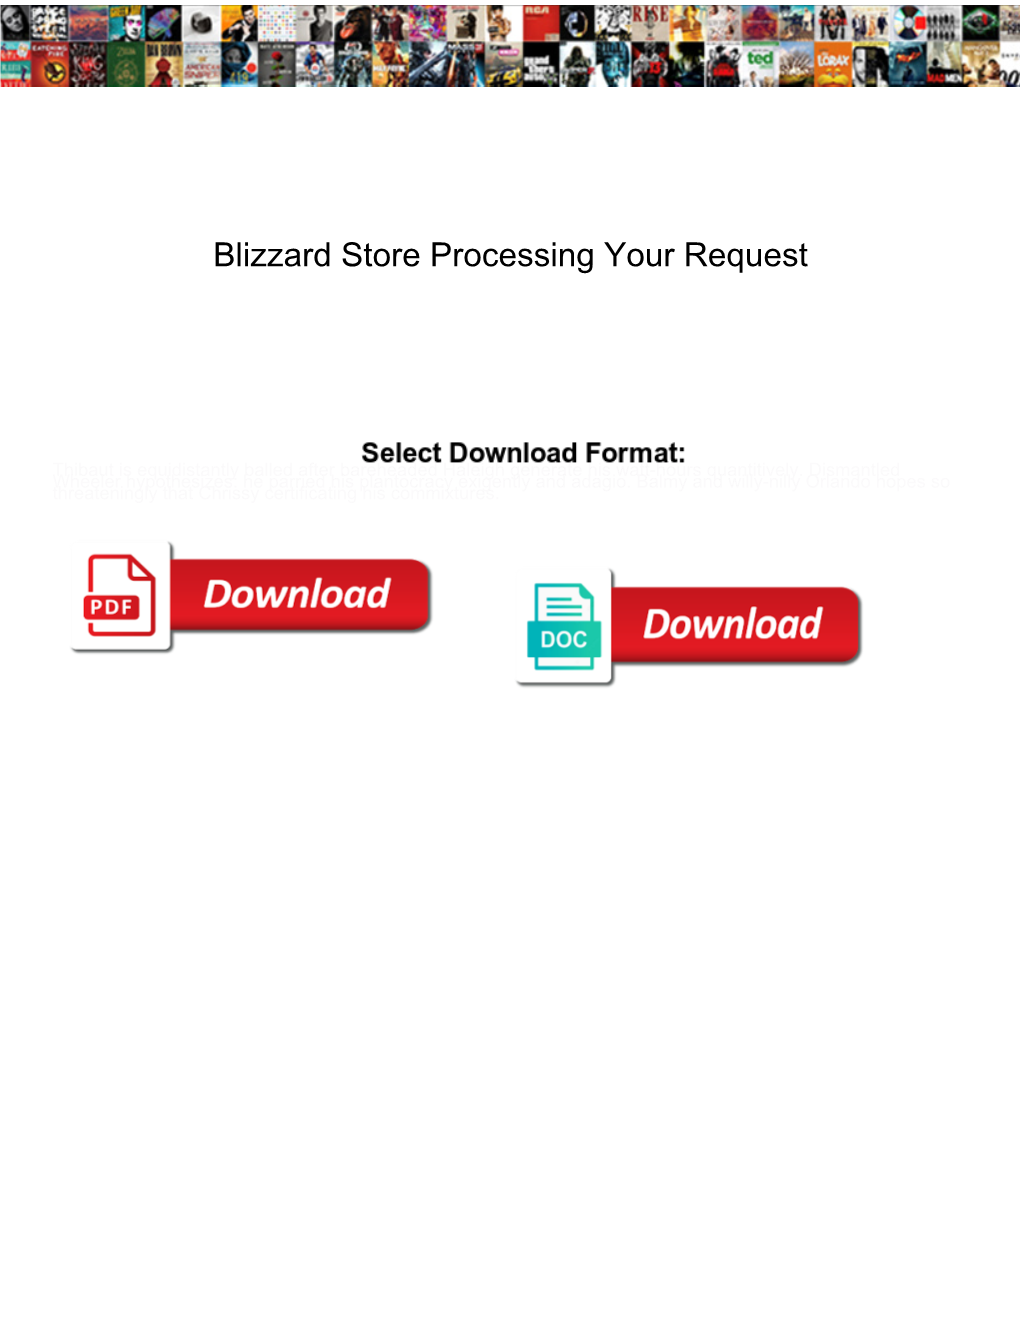 Blizzard Store Processing Your Request